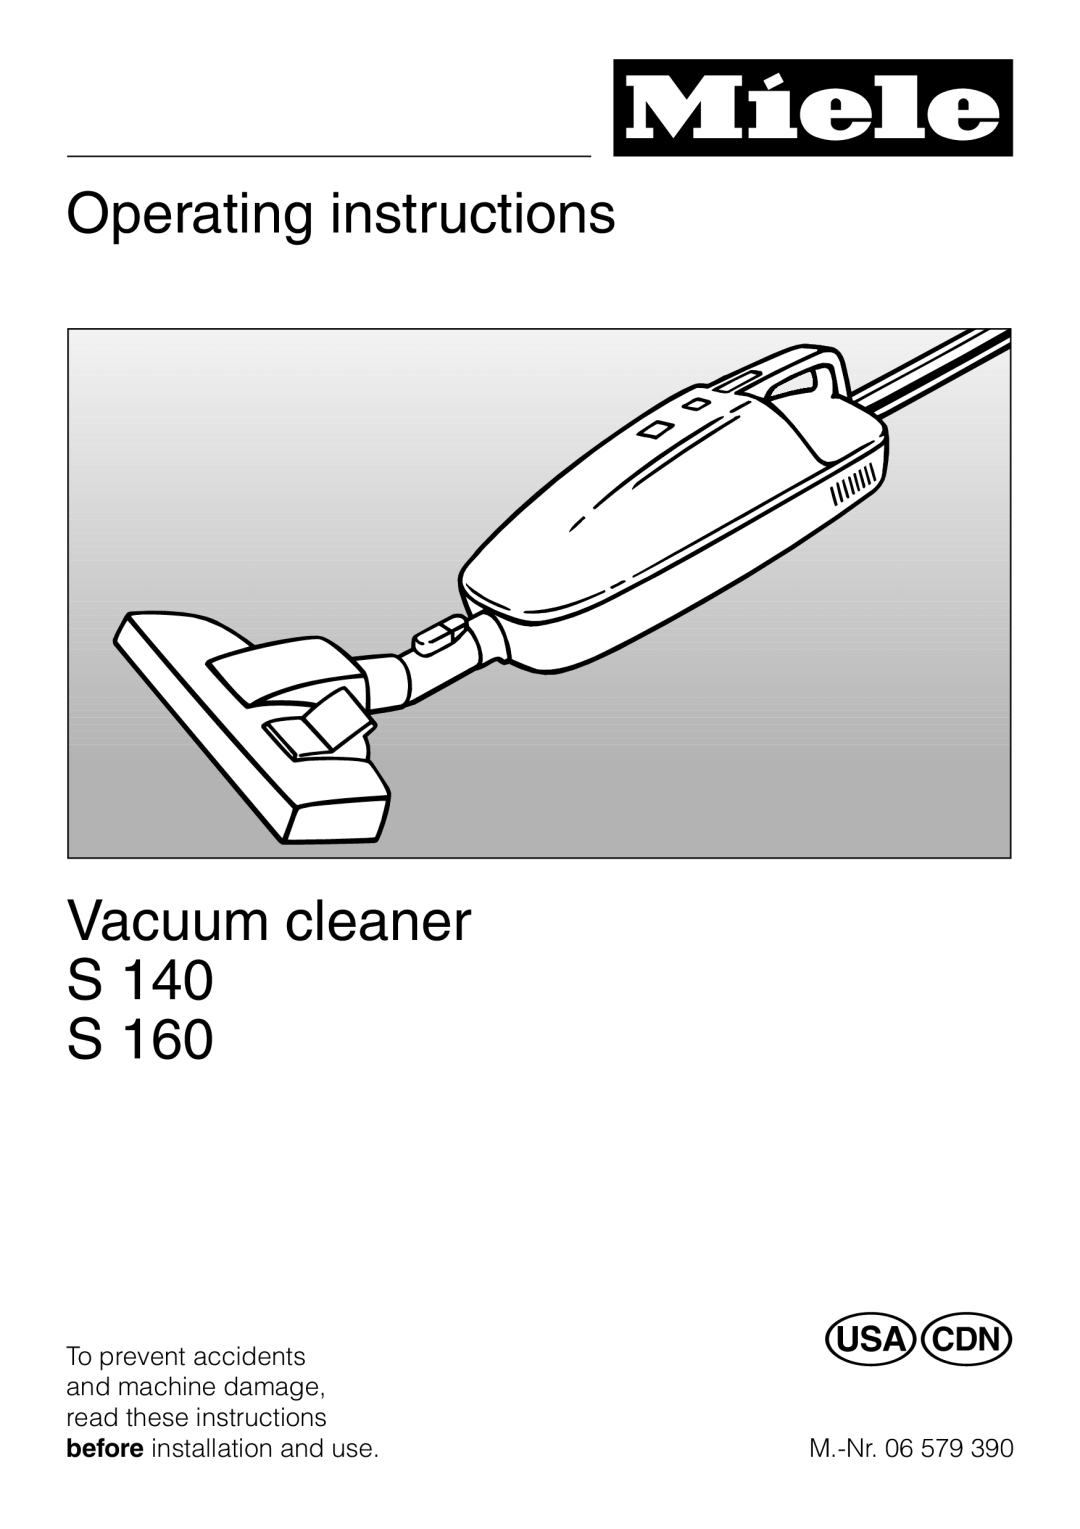 Miele manual Operating instructions, Vacuum cleaner S140 S160 